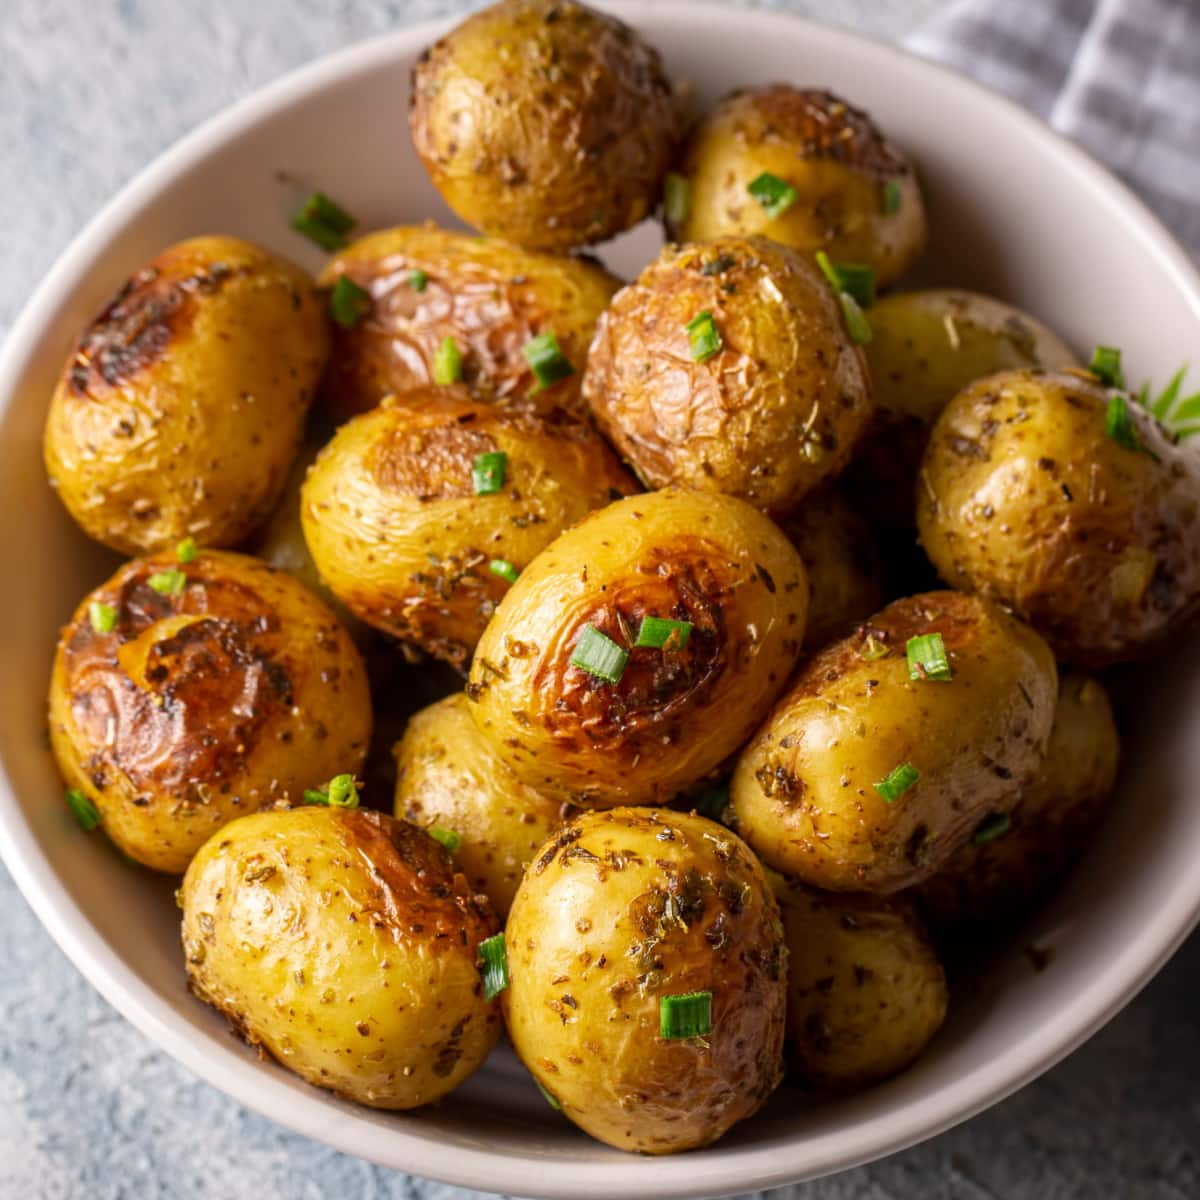 Roasted Baby Potatoes on a Bowl